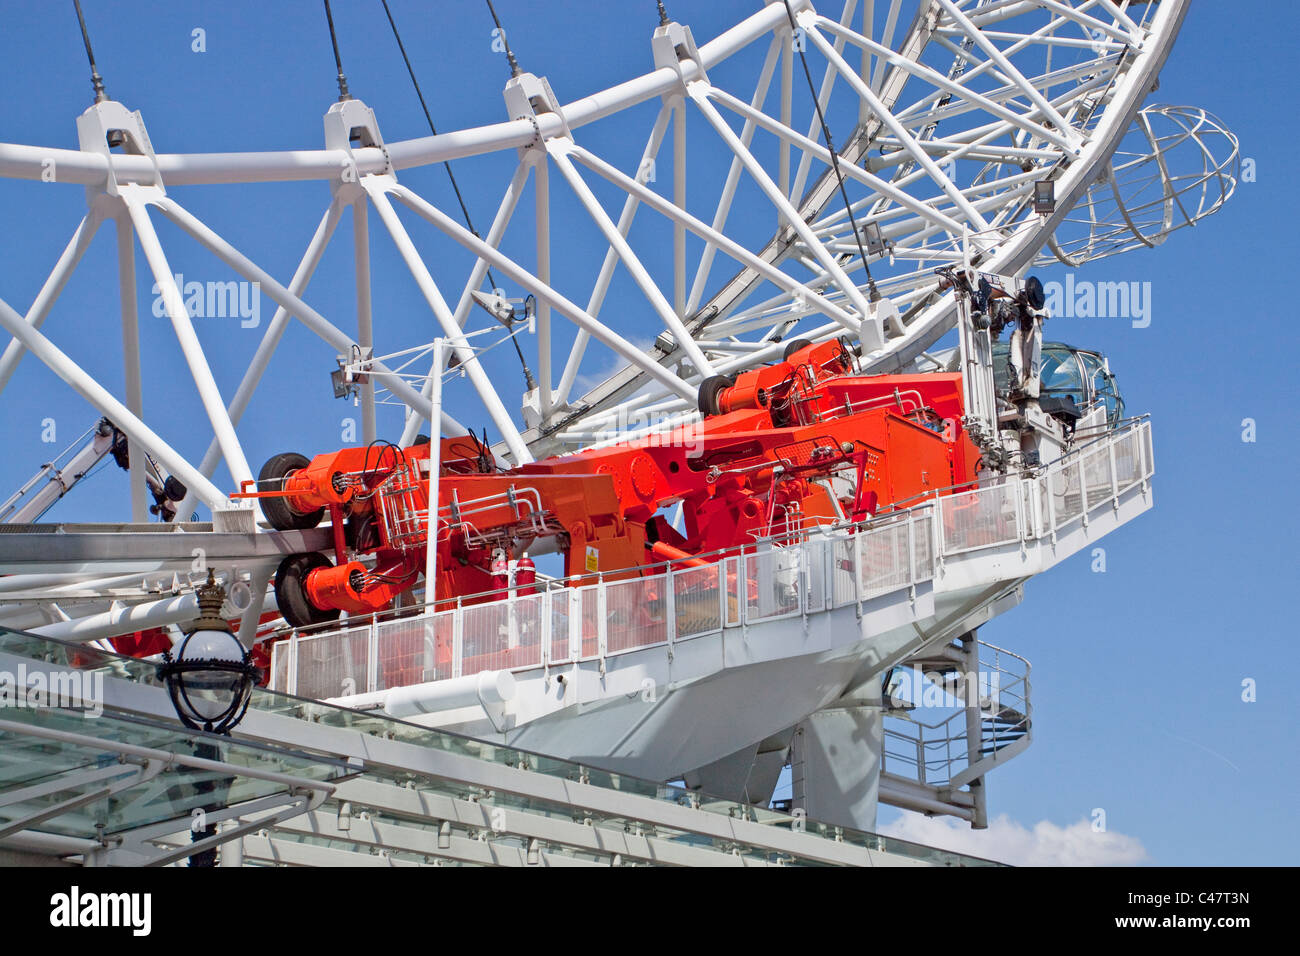 The London Eye on the South Bank of the River Thames in London.  Detail showing the drive mechanism. Stock Photo